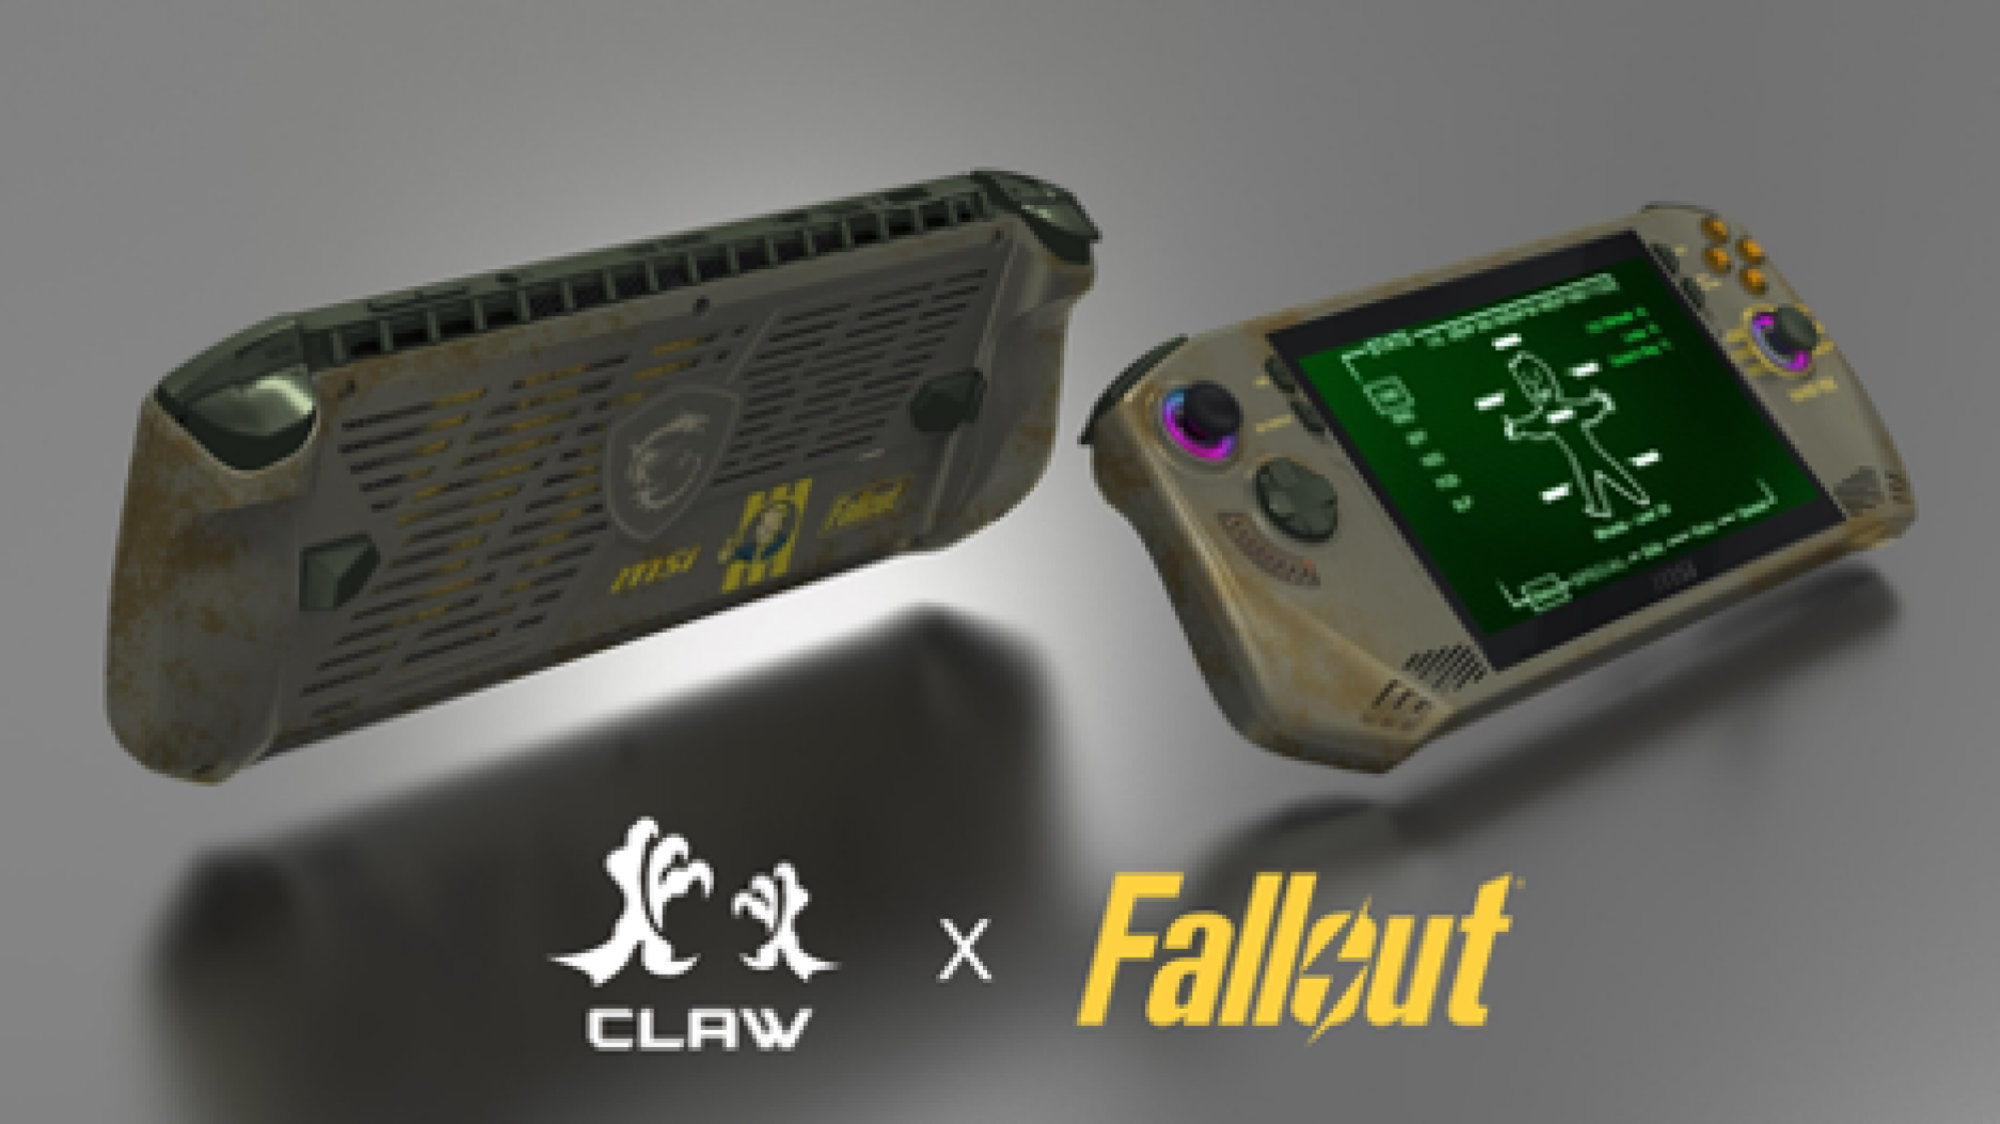 Édition MSI Claw "Fallout"